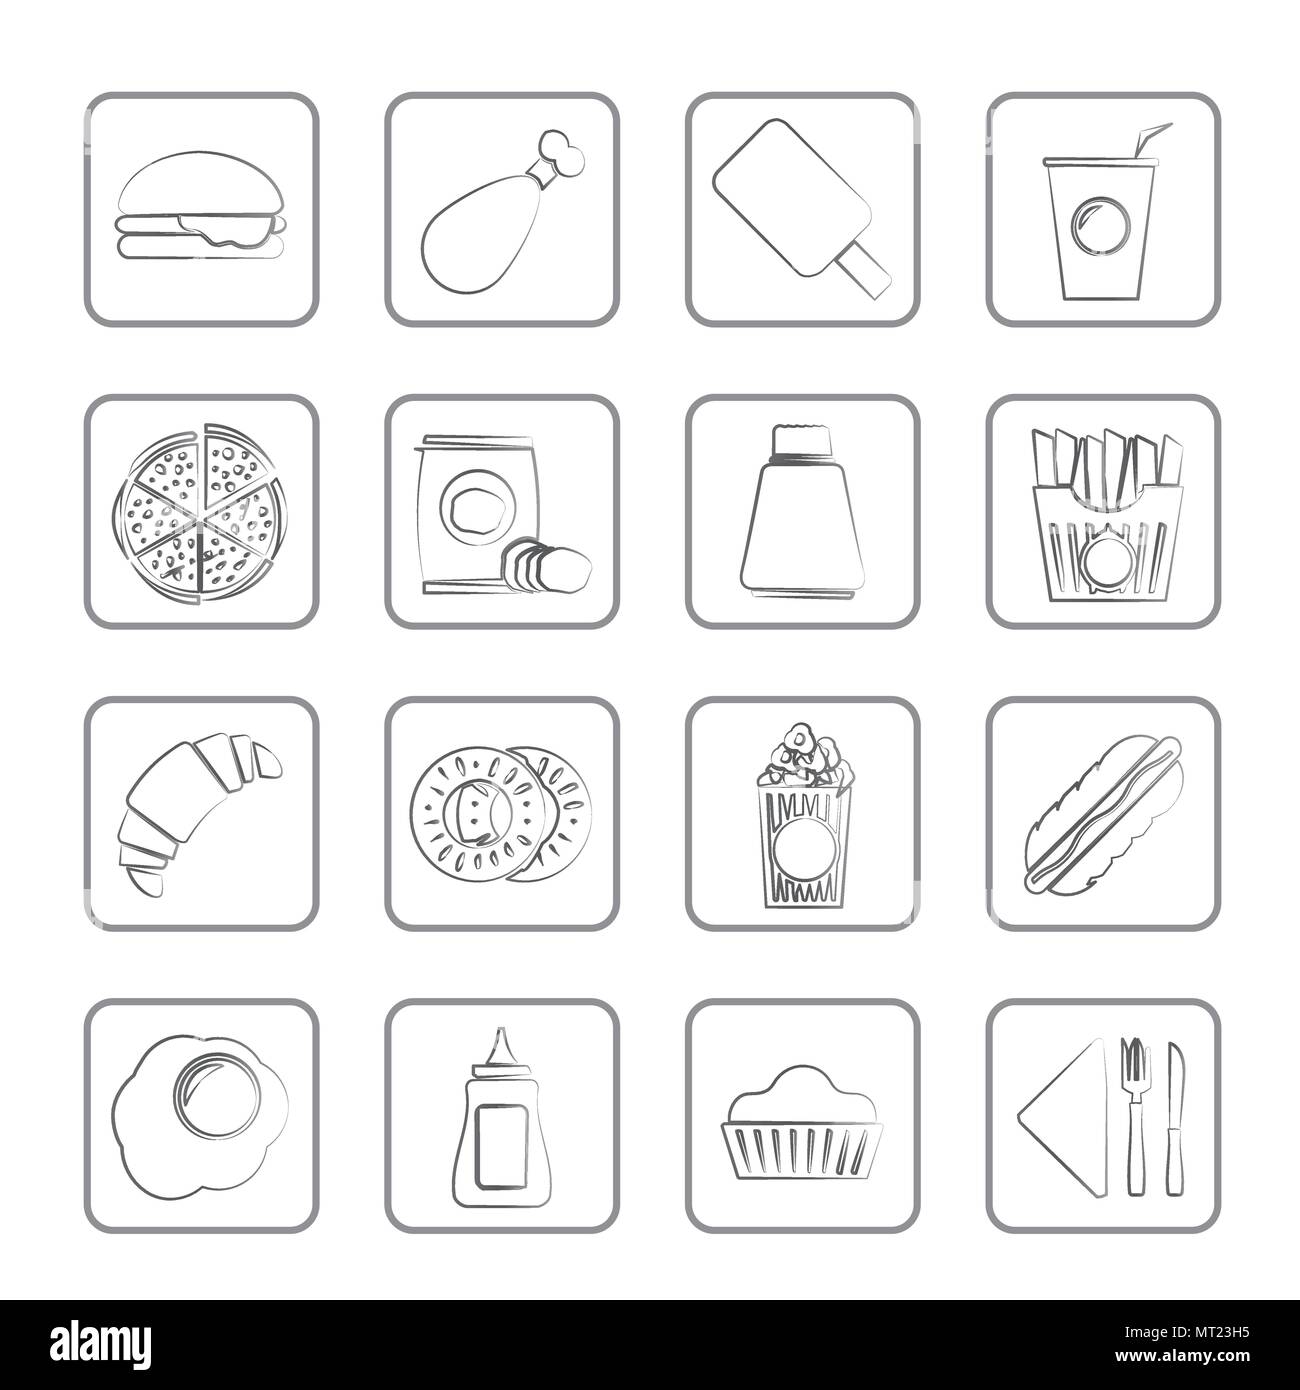 Fast food and drink icons - vector icon set Stock Vector